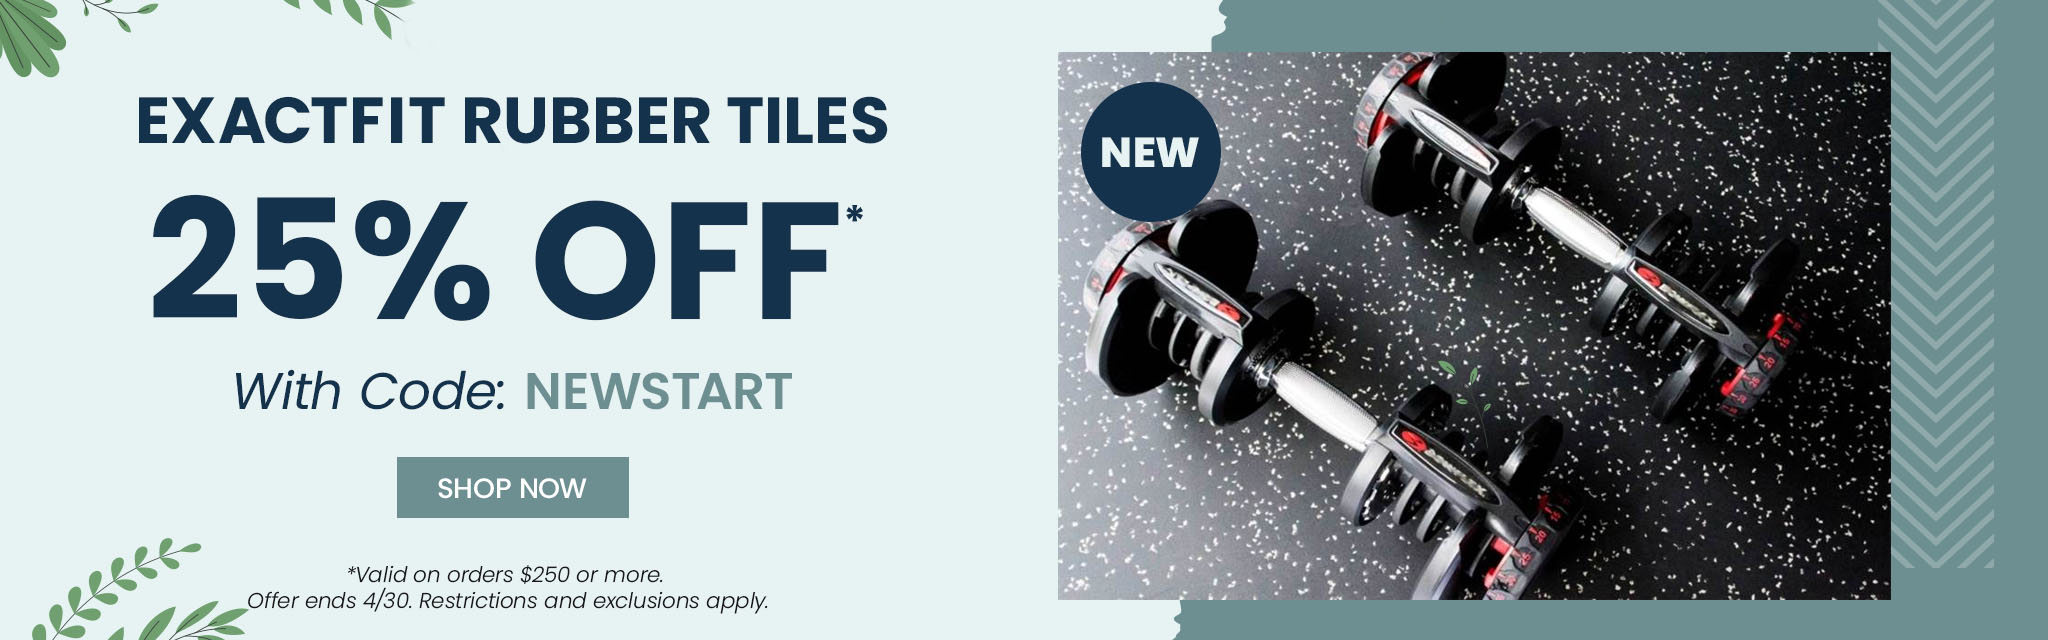 ExactFit Rubber Tiles. 25% Off With Code: NEWSTART Shop Now. Valid on orders $250 or more. Offer ends April 30th. Restrictions and exclusions apply.